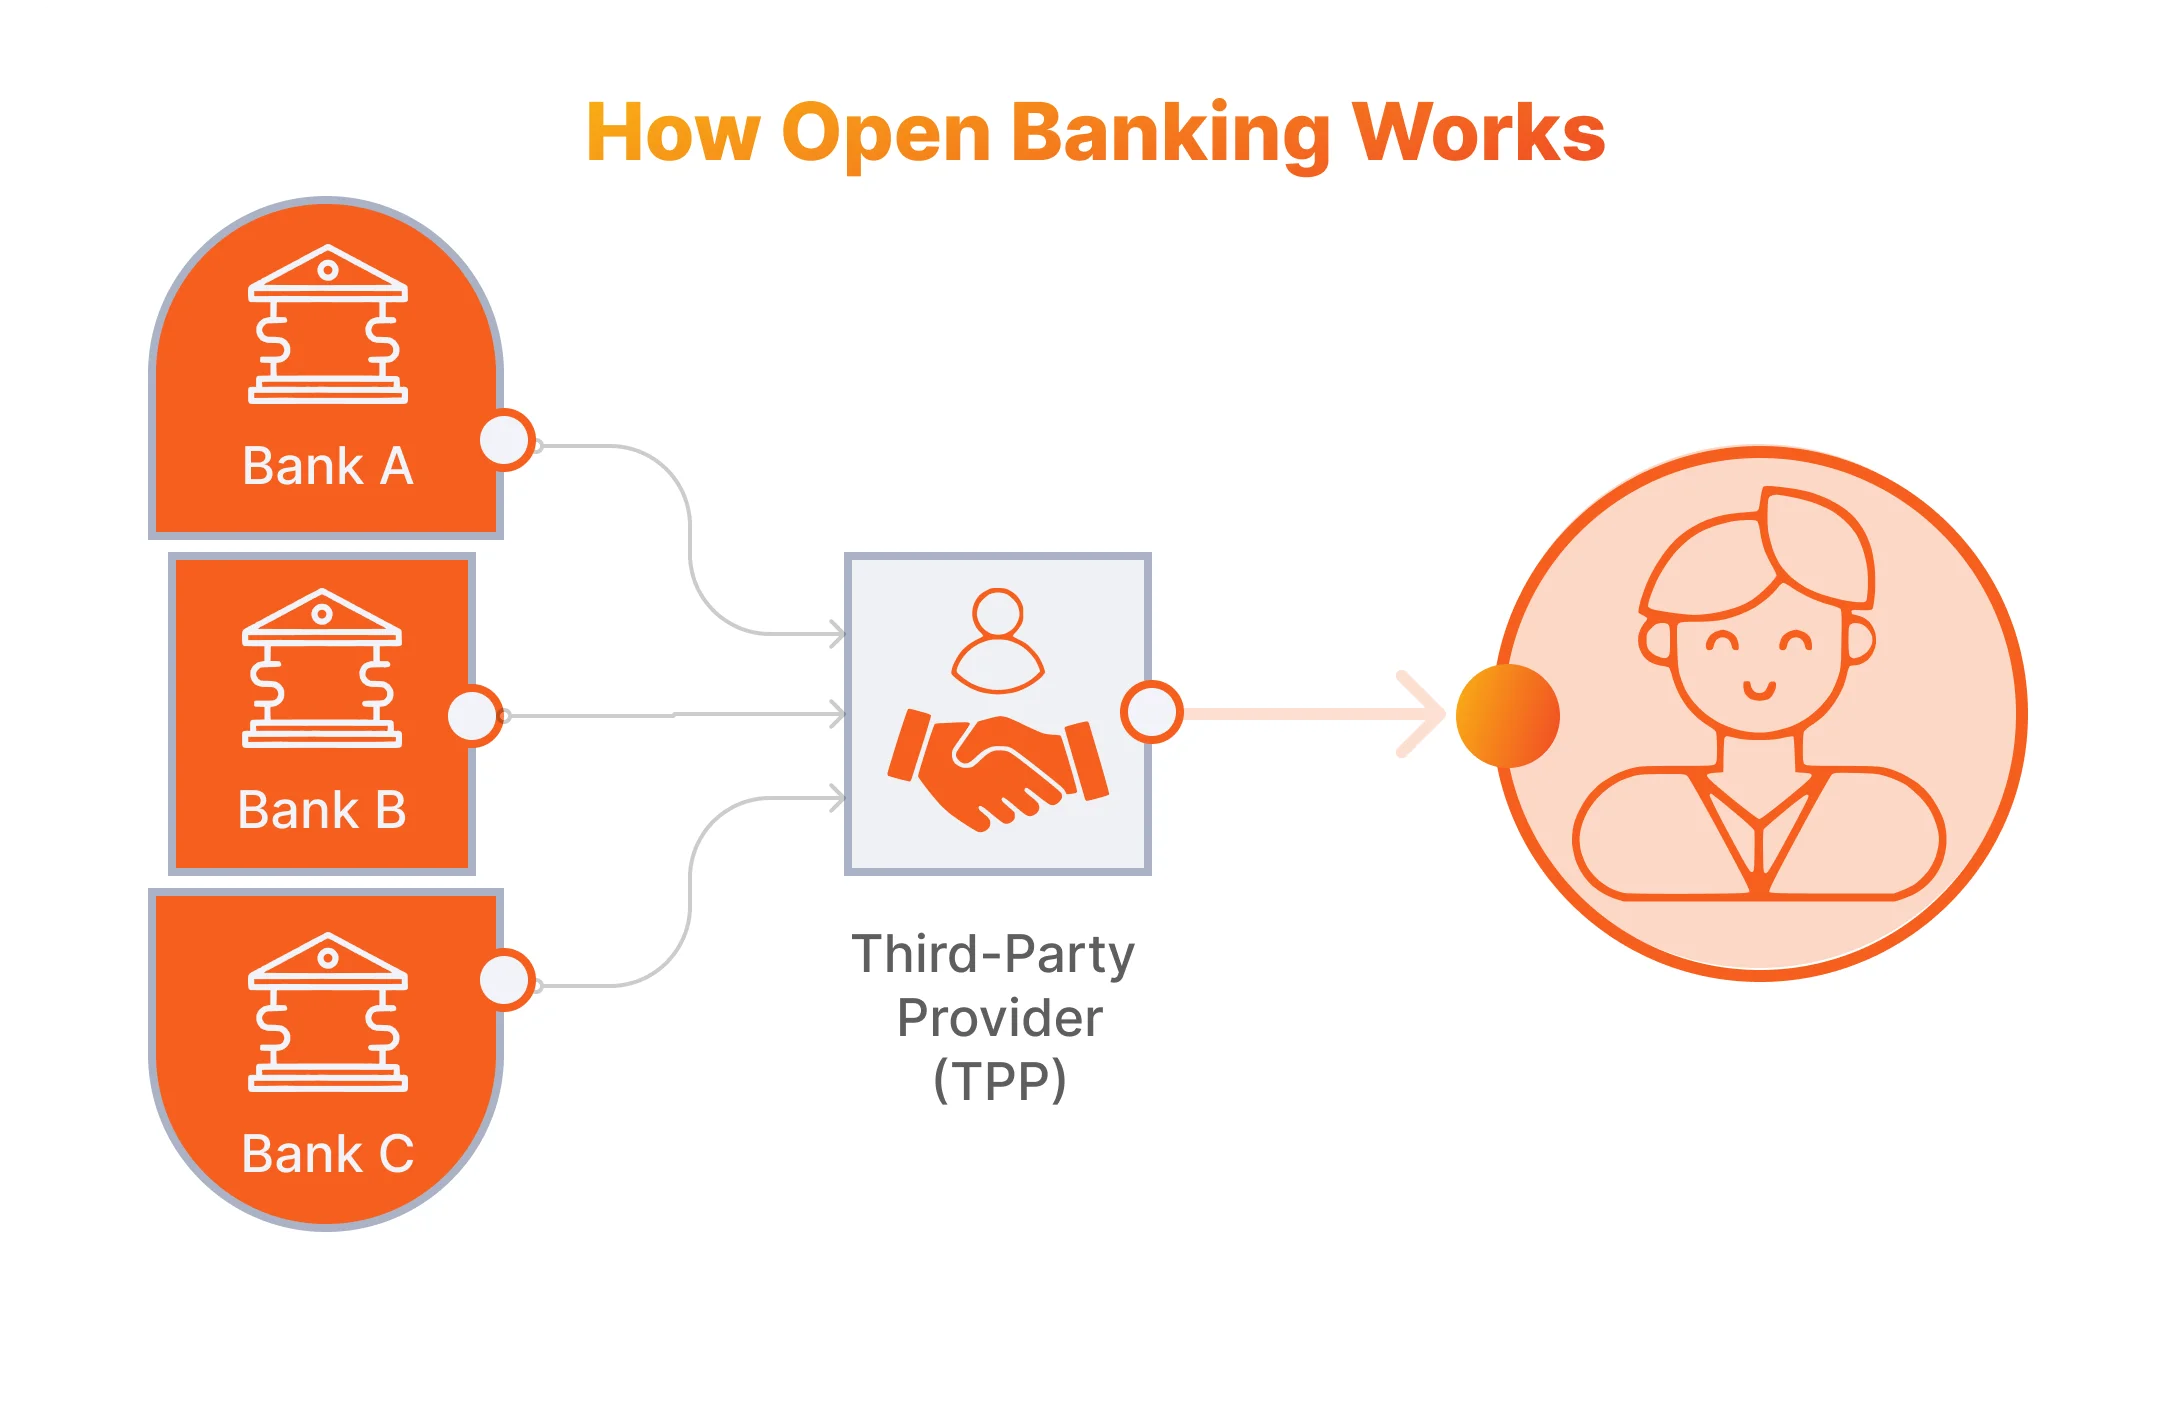 How Open Banking Works